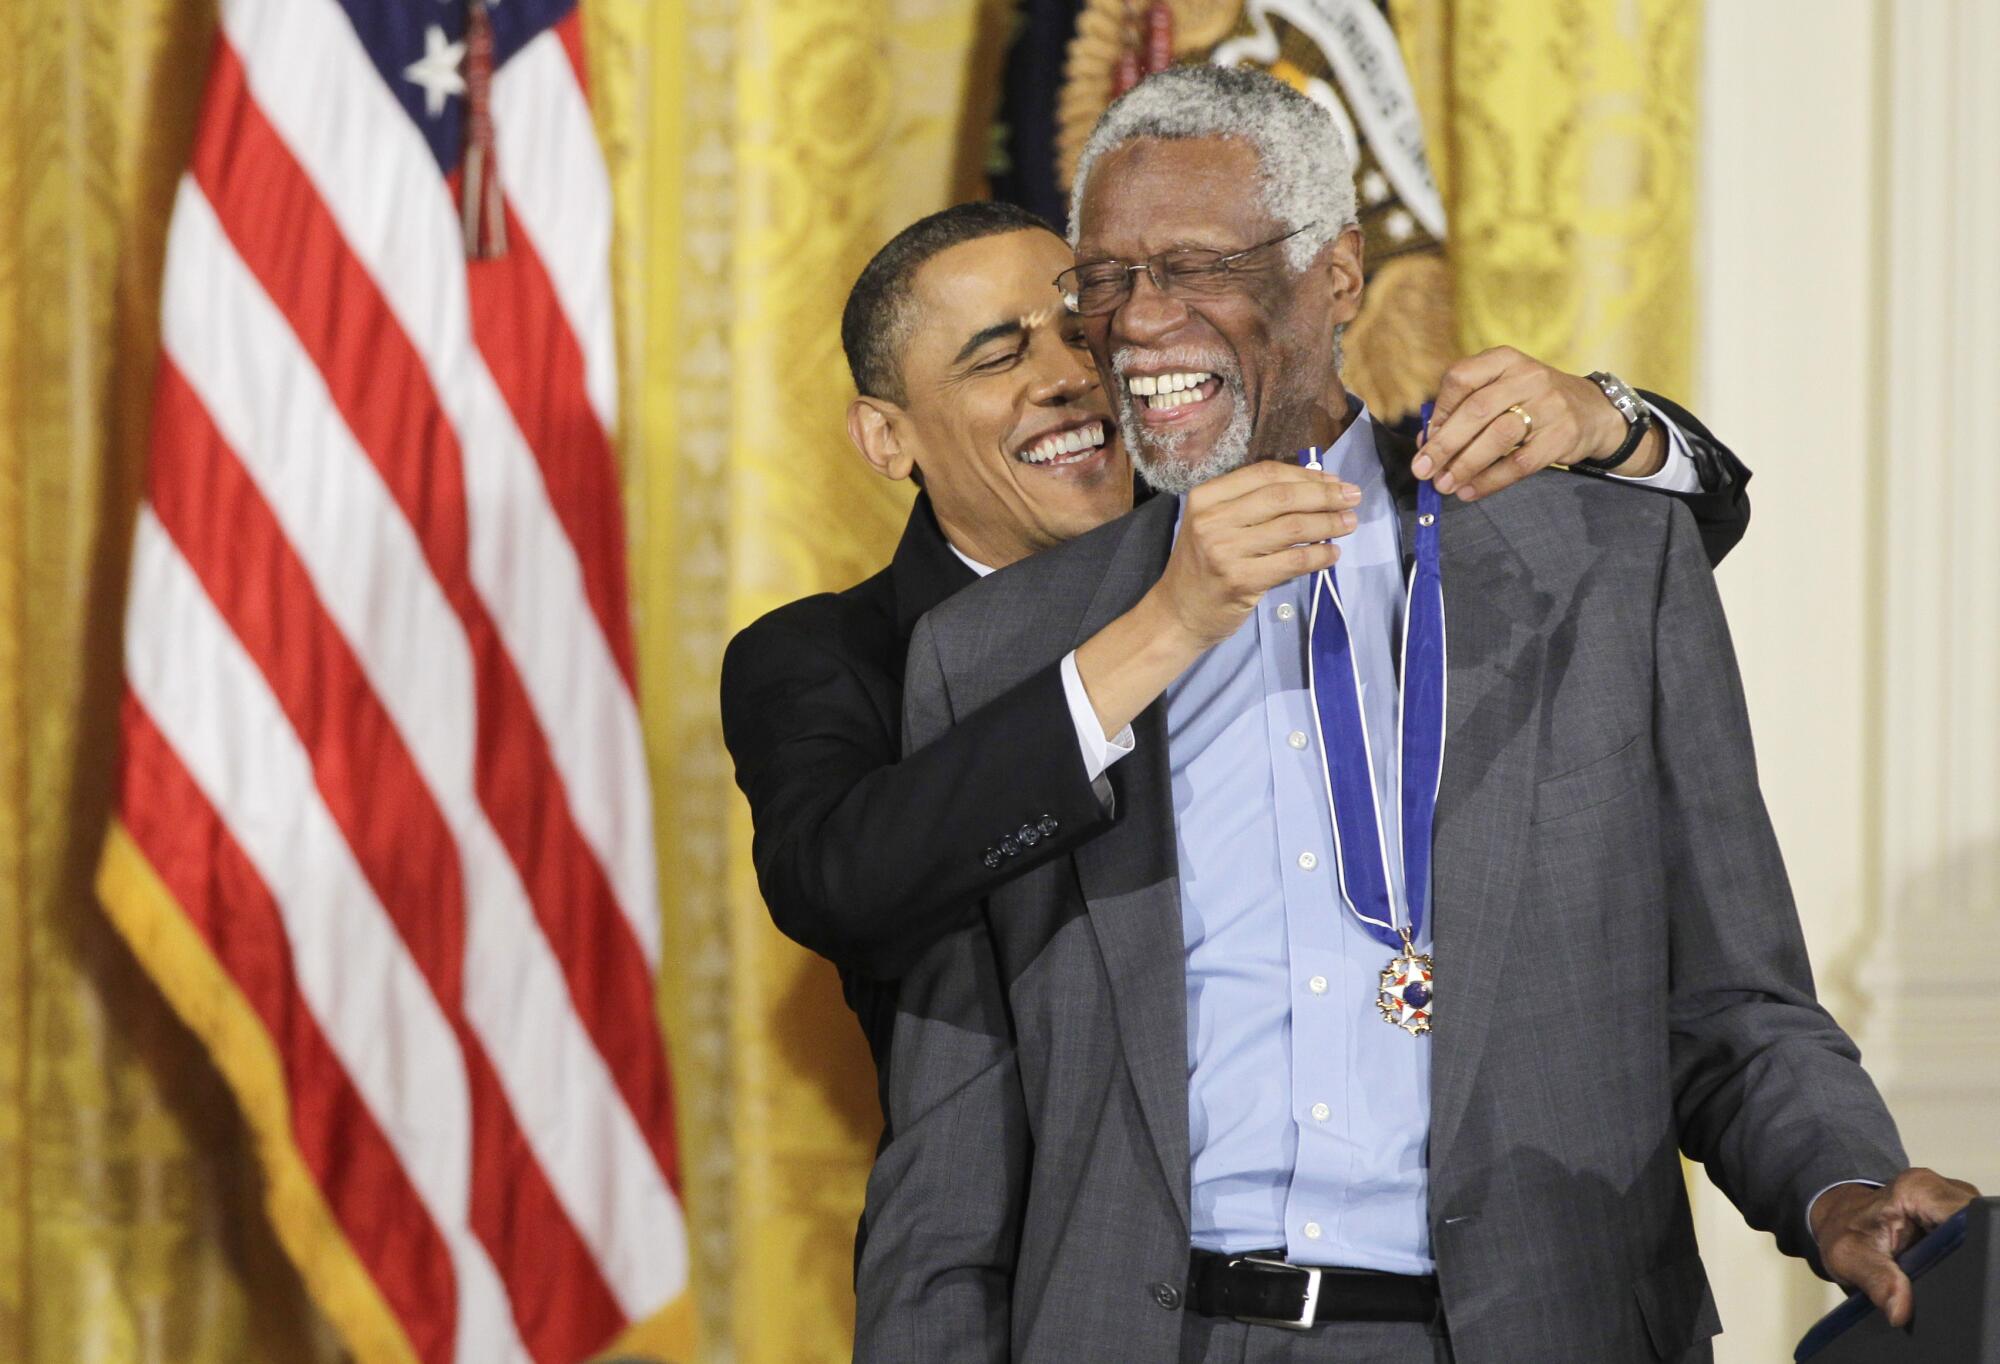 President Barack Obama reaches up to present a 2010 Presidential Medal of Freedom to NBA legend Bill Russell.